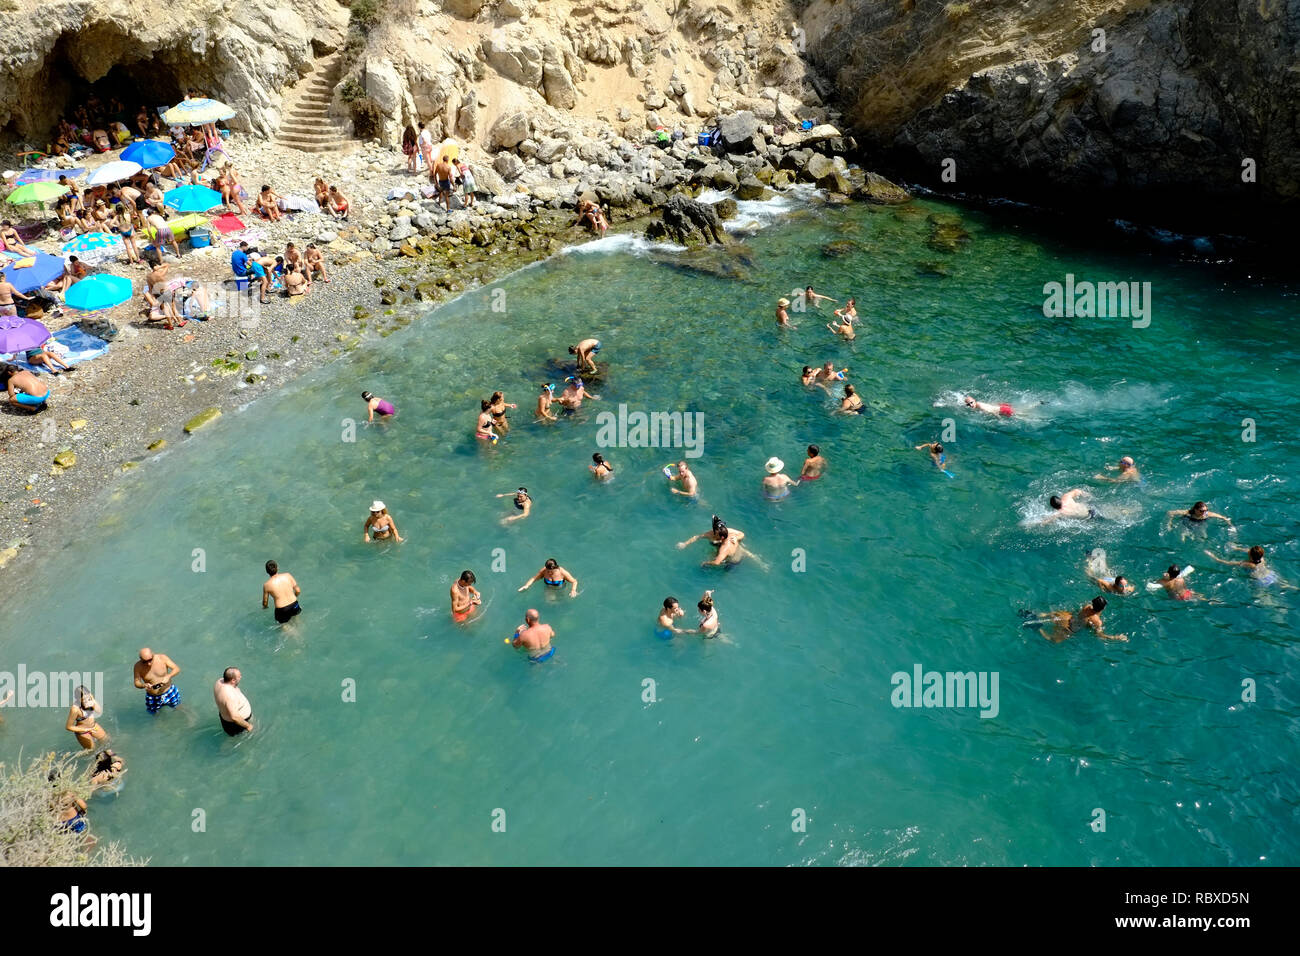 View of a crowded beach cove at the weekend in August on the island of Tabarca, Alicante. Spain Stock Photo